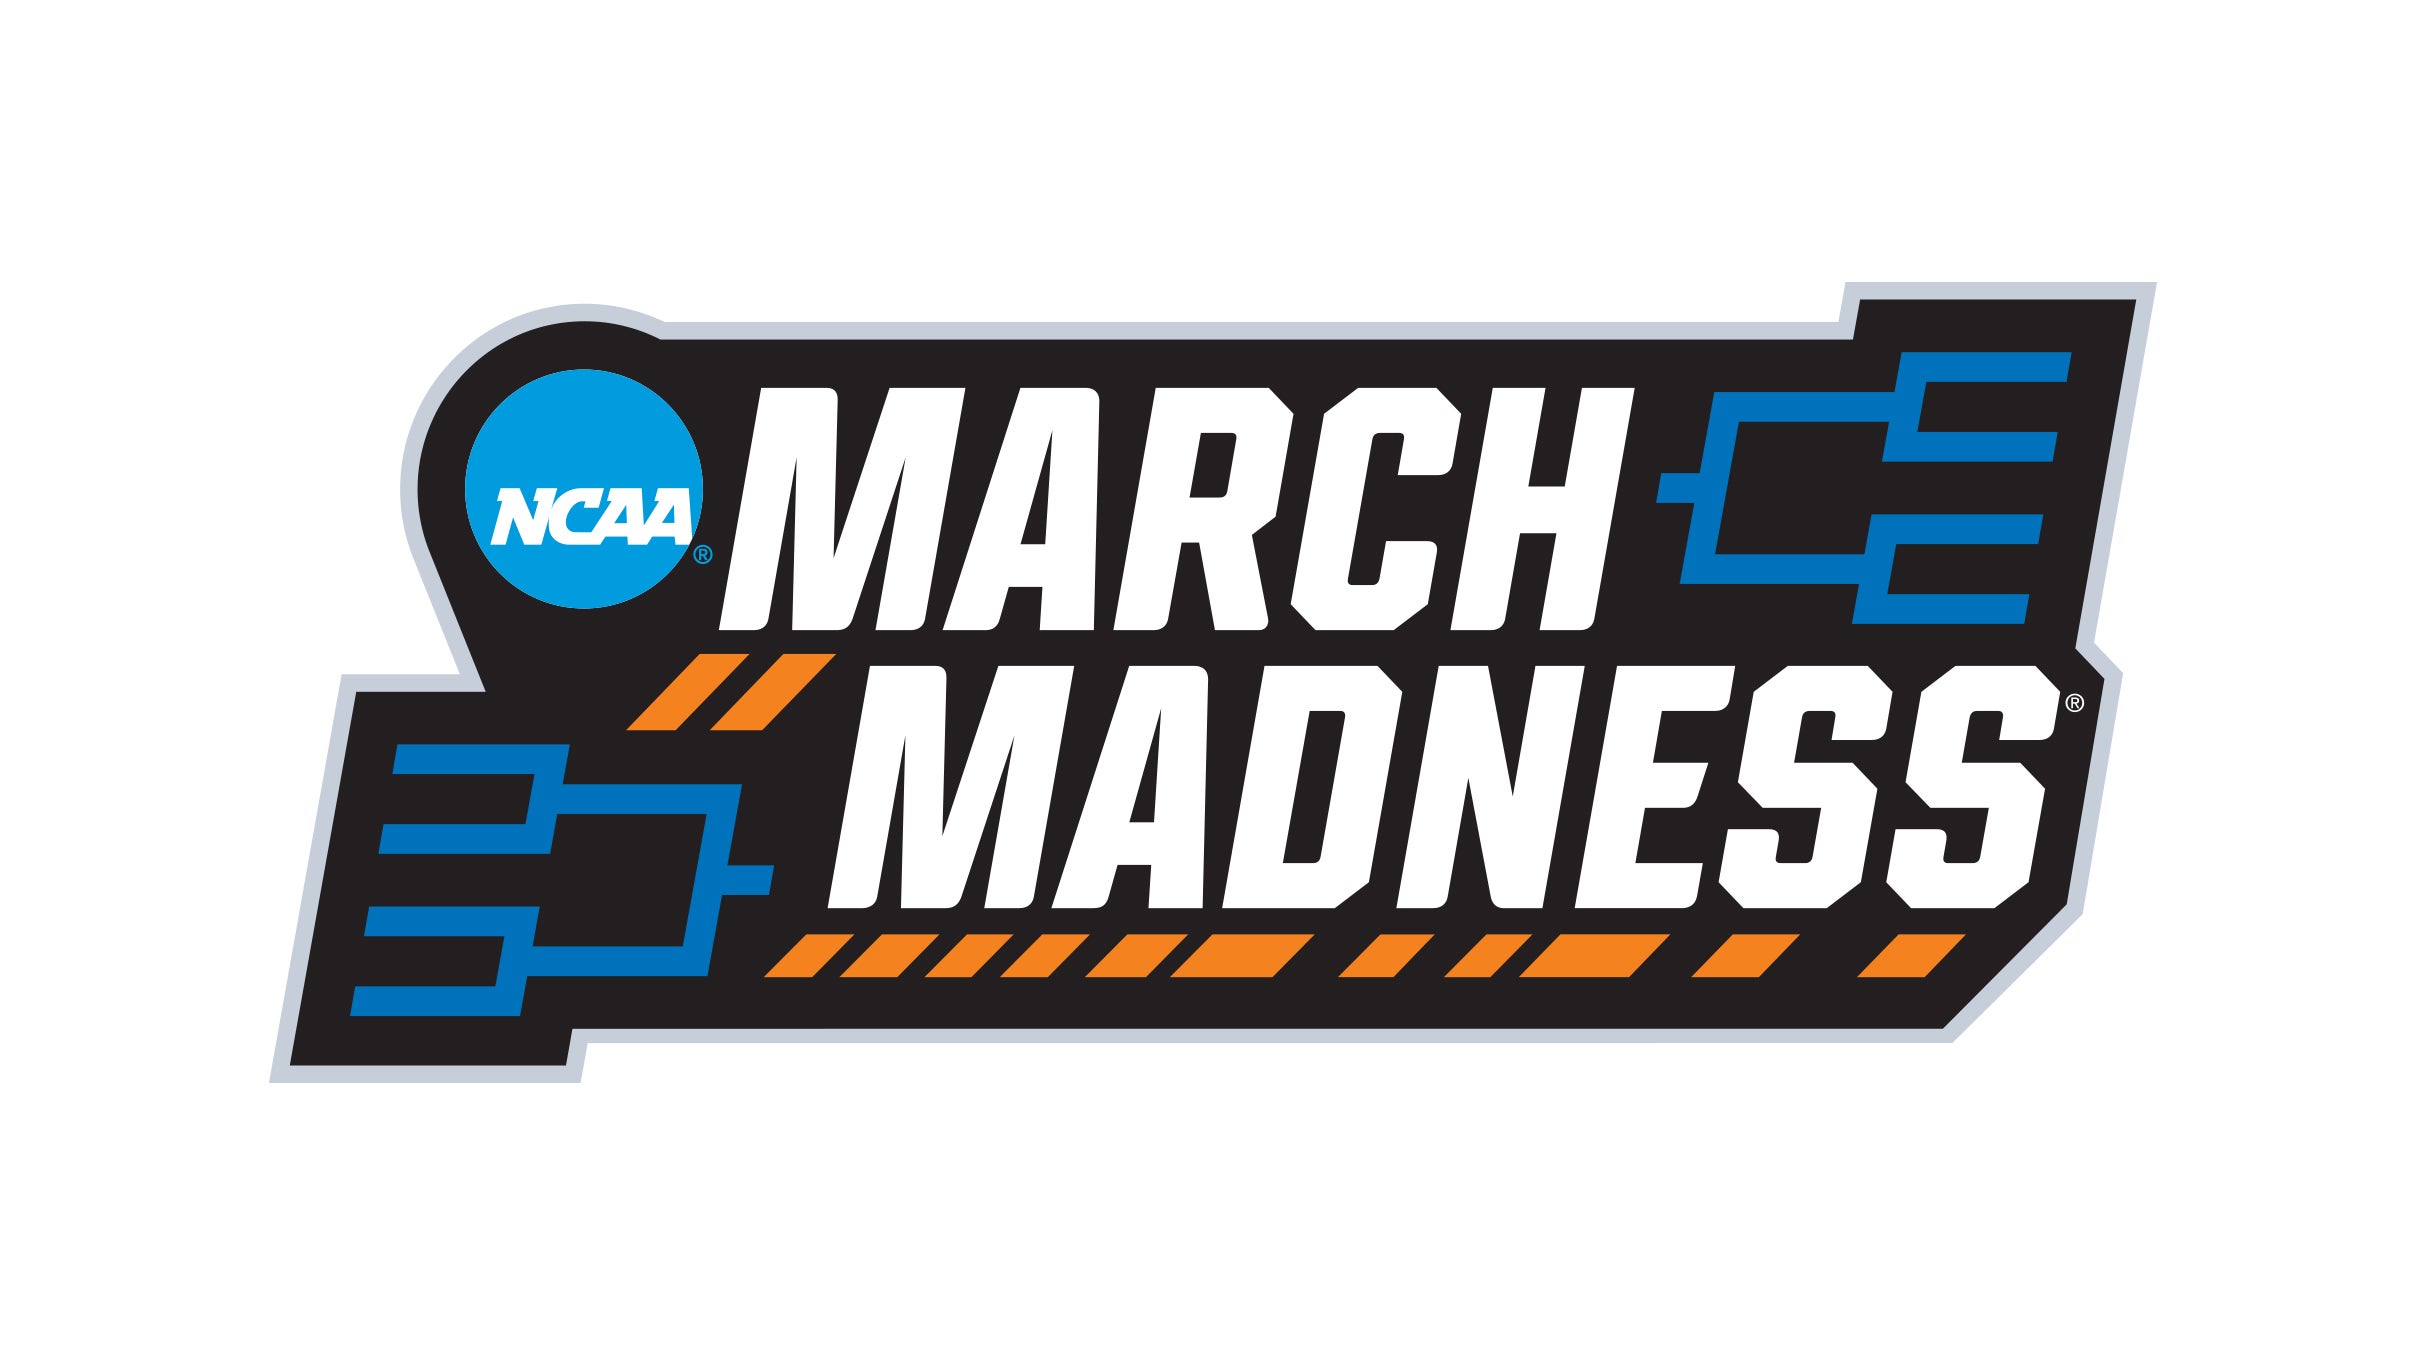 NCAA Women's Basketball Tournament: All Sessions